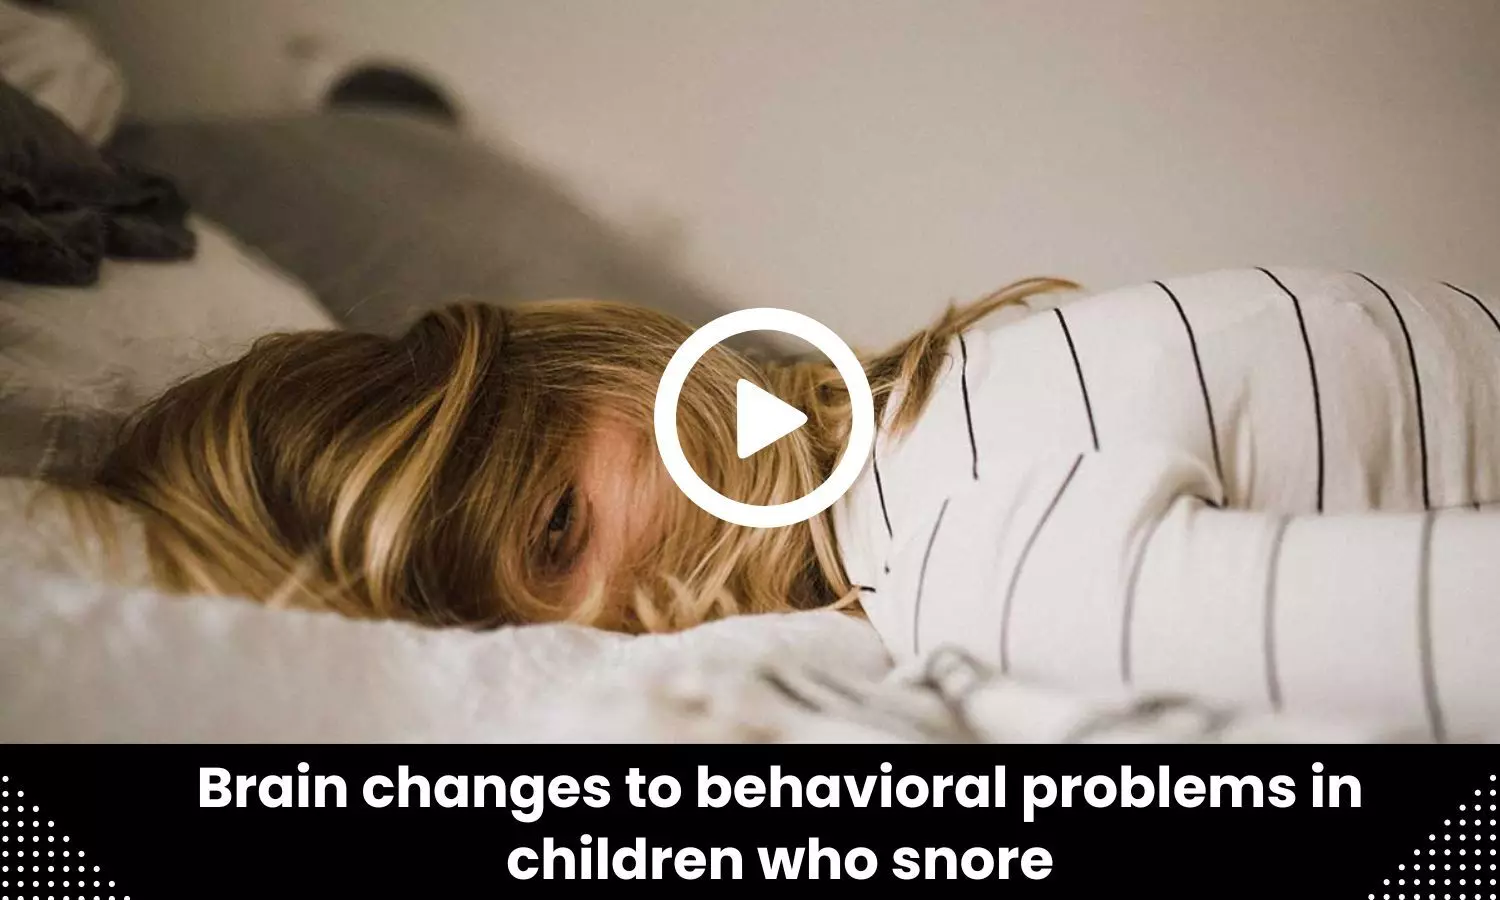 Brain changes to behavioral problems in children who snore